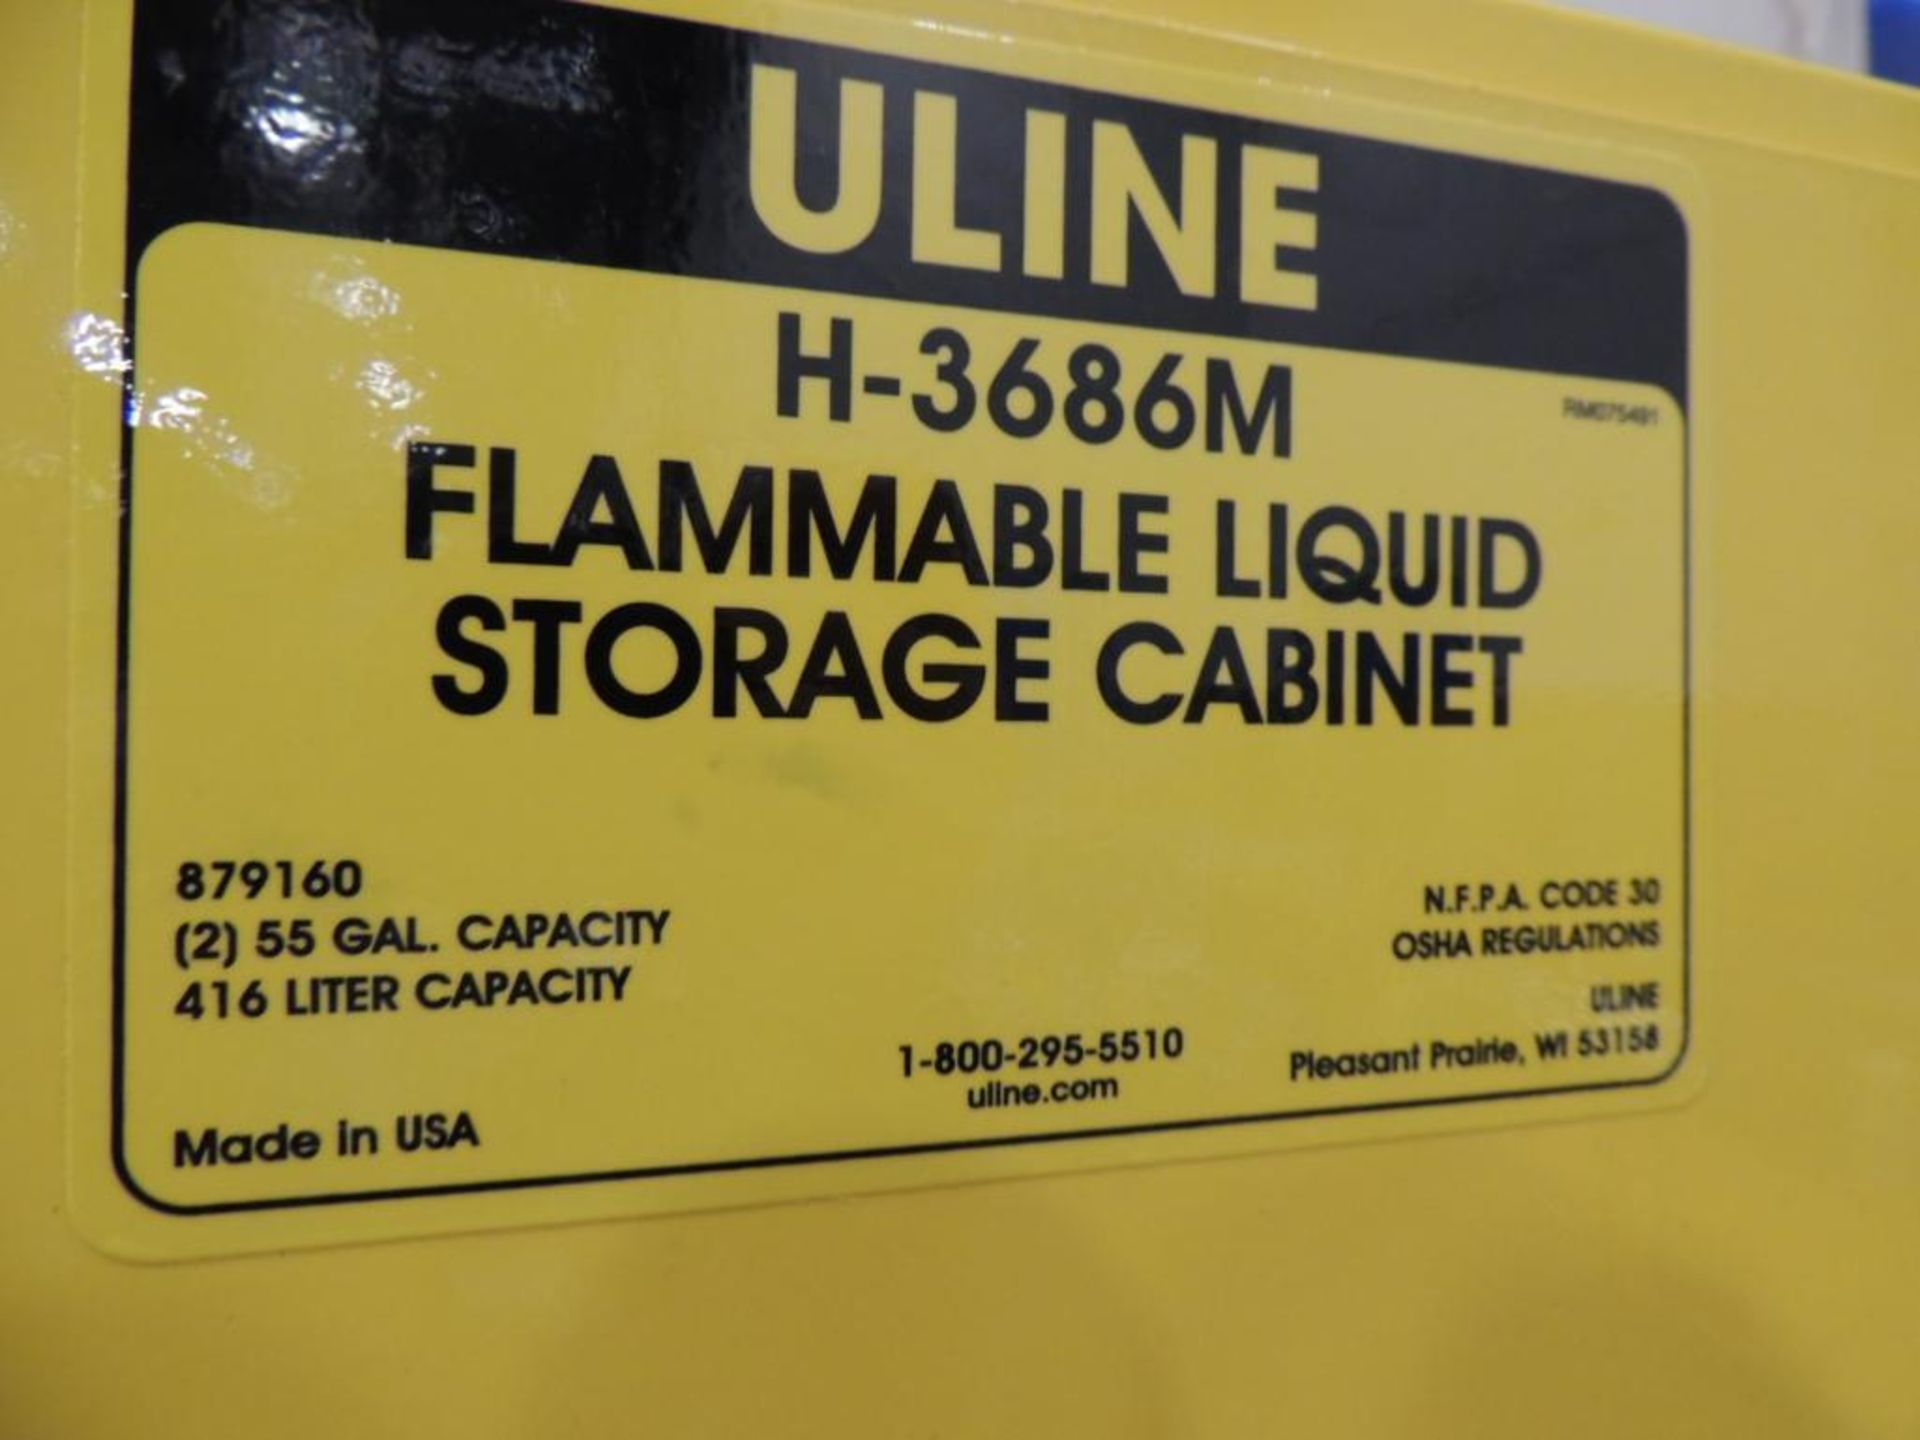 Uline H-3685M Flame Proof Cabinet, with Roller Pan for (2) 55 Gallon Drums - Image 2 of 2